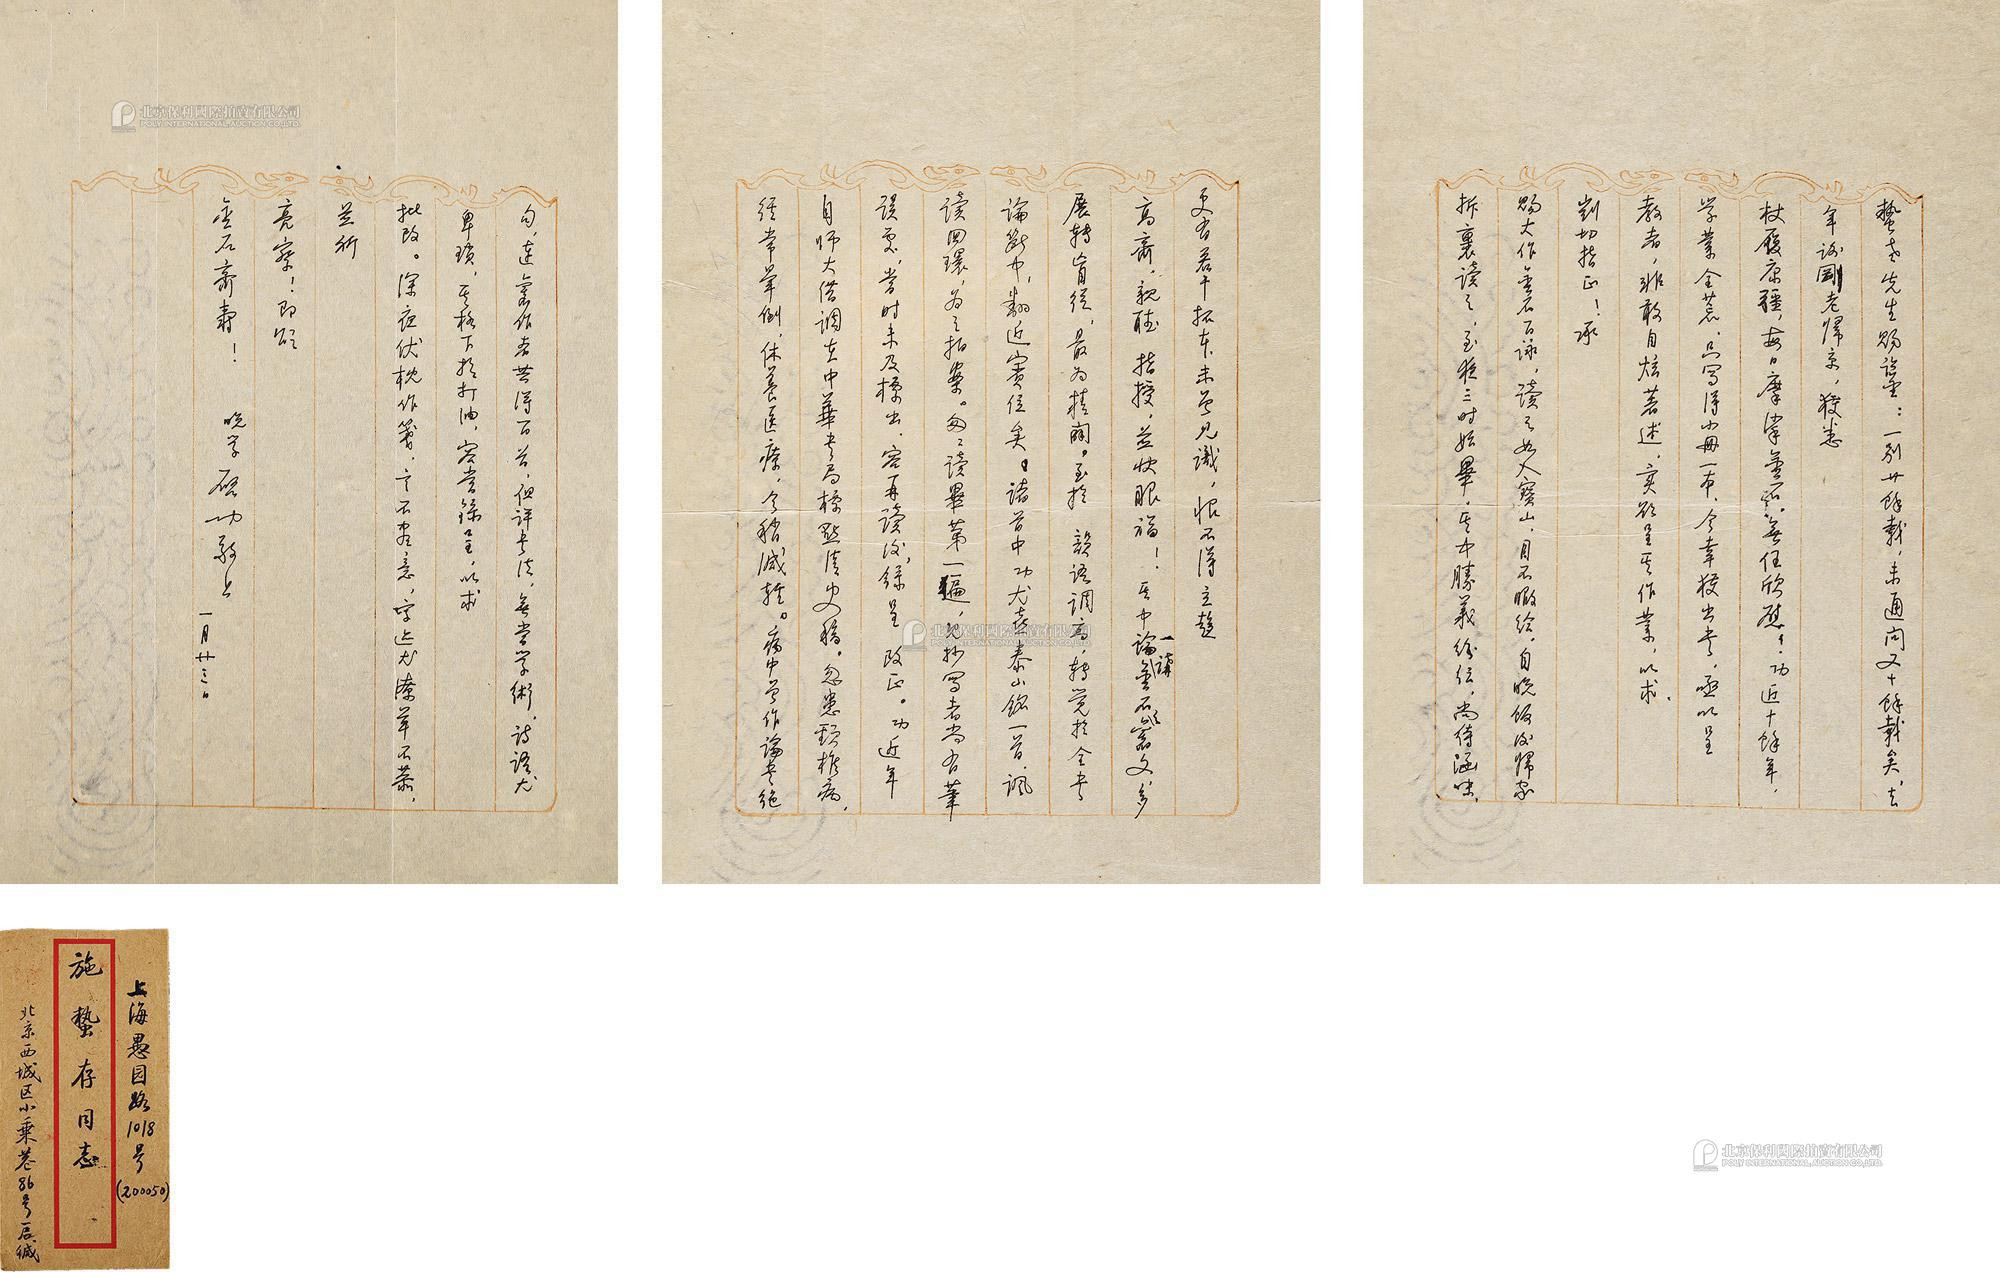 Letter of three pages by Qigong to Shi Zhecun Caused， with original cover